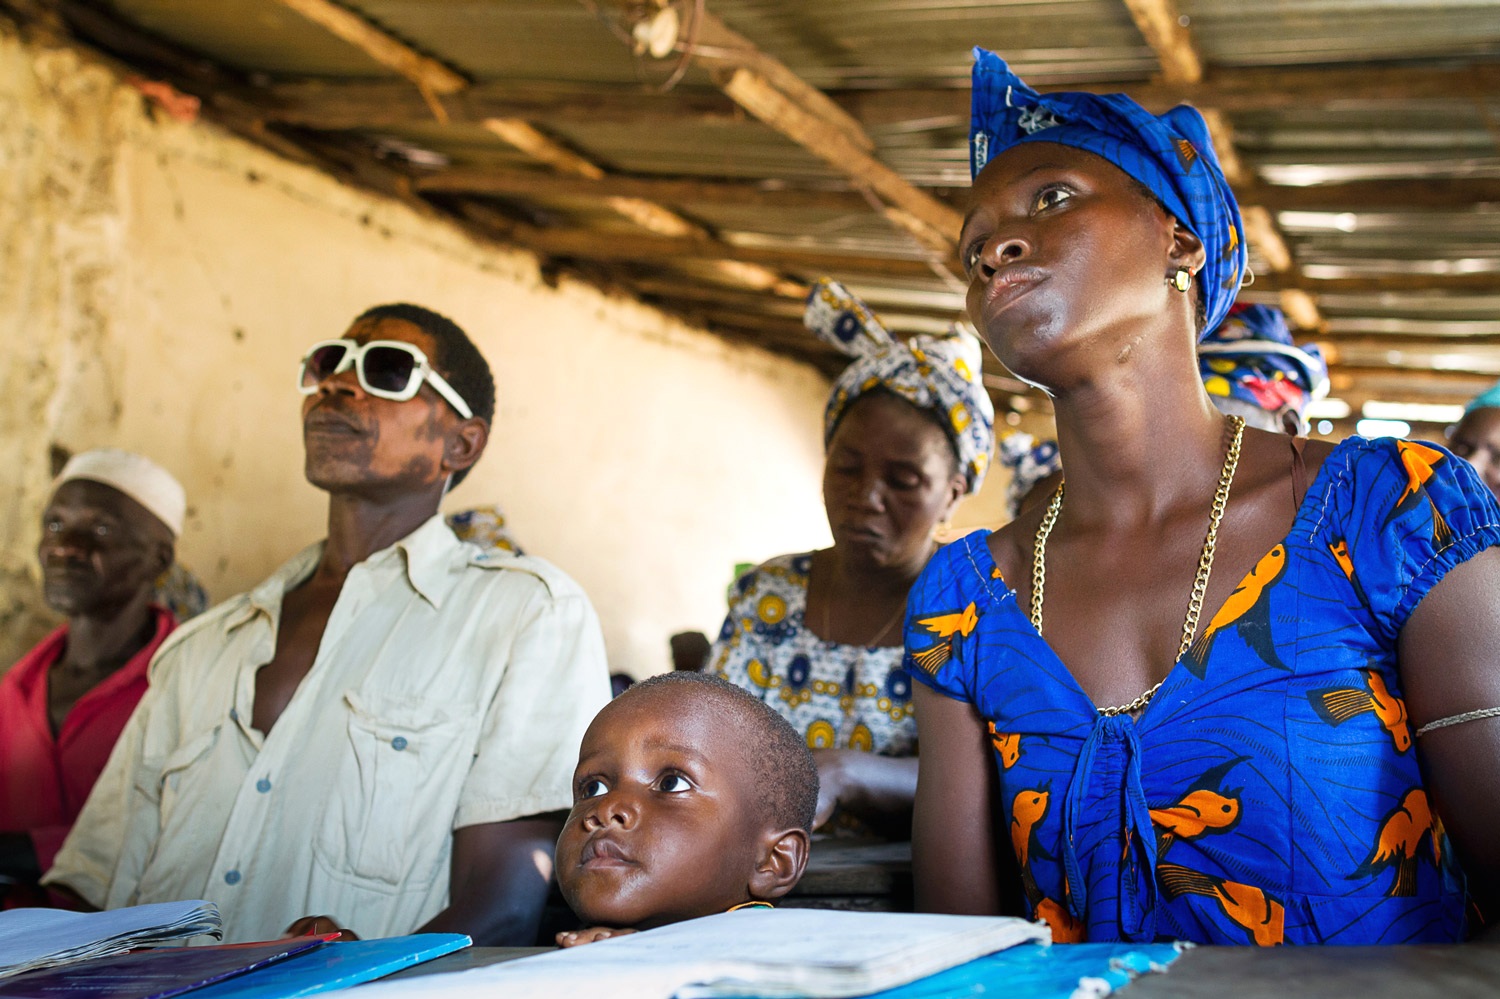  OPEN THIS PUBLICATION  UNICEF GUINEA BISSAU: THE DJAU FAMILY'S STORY  